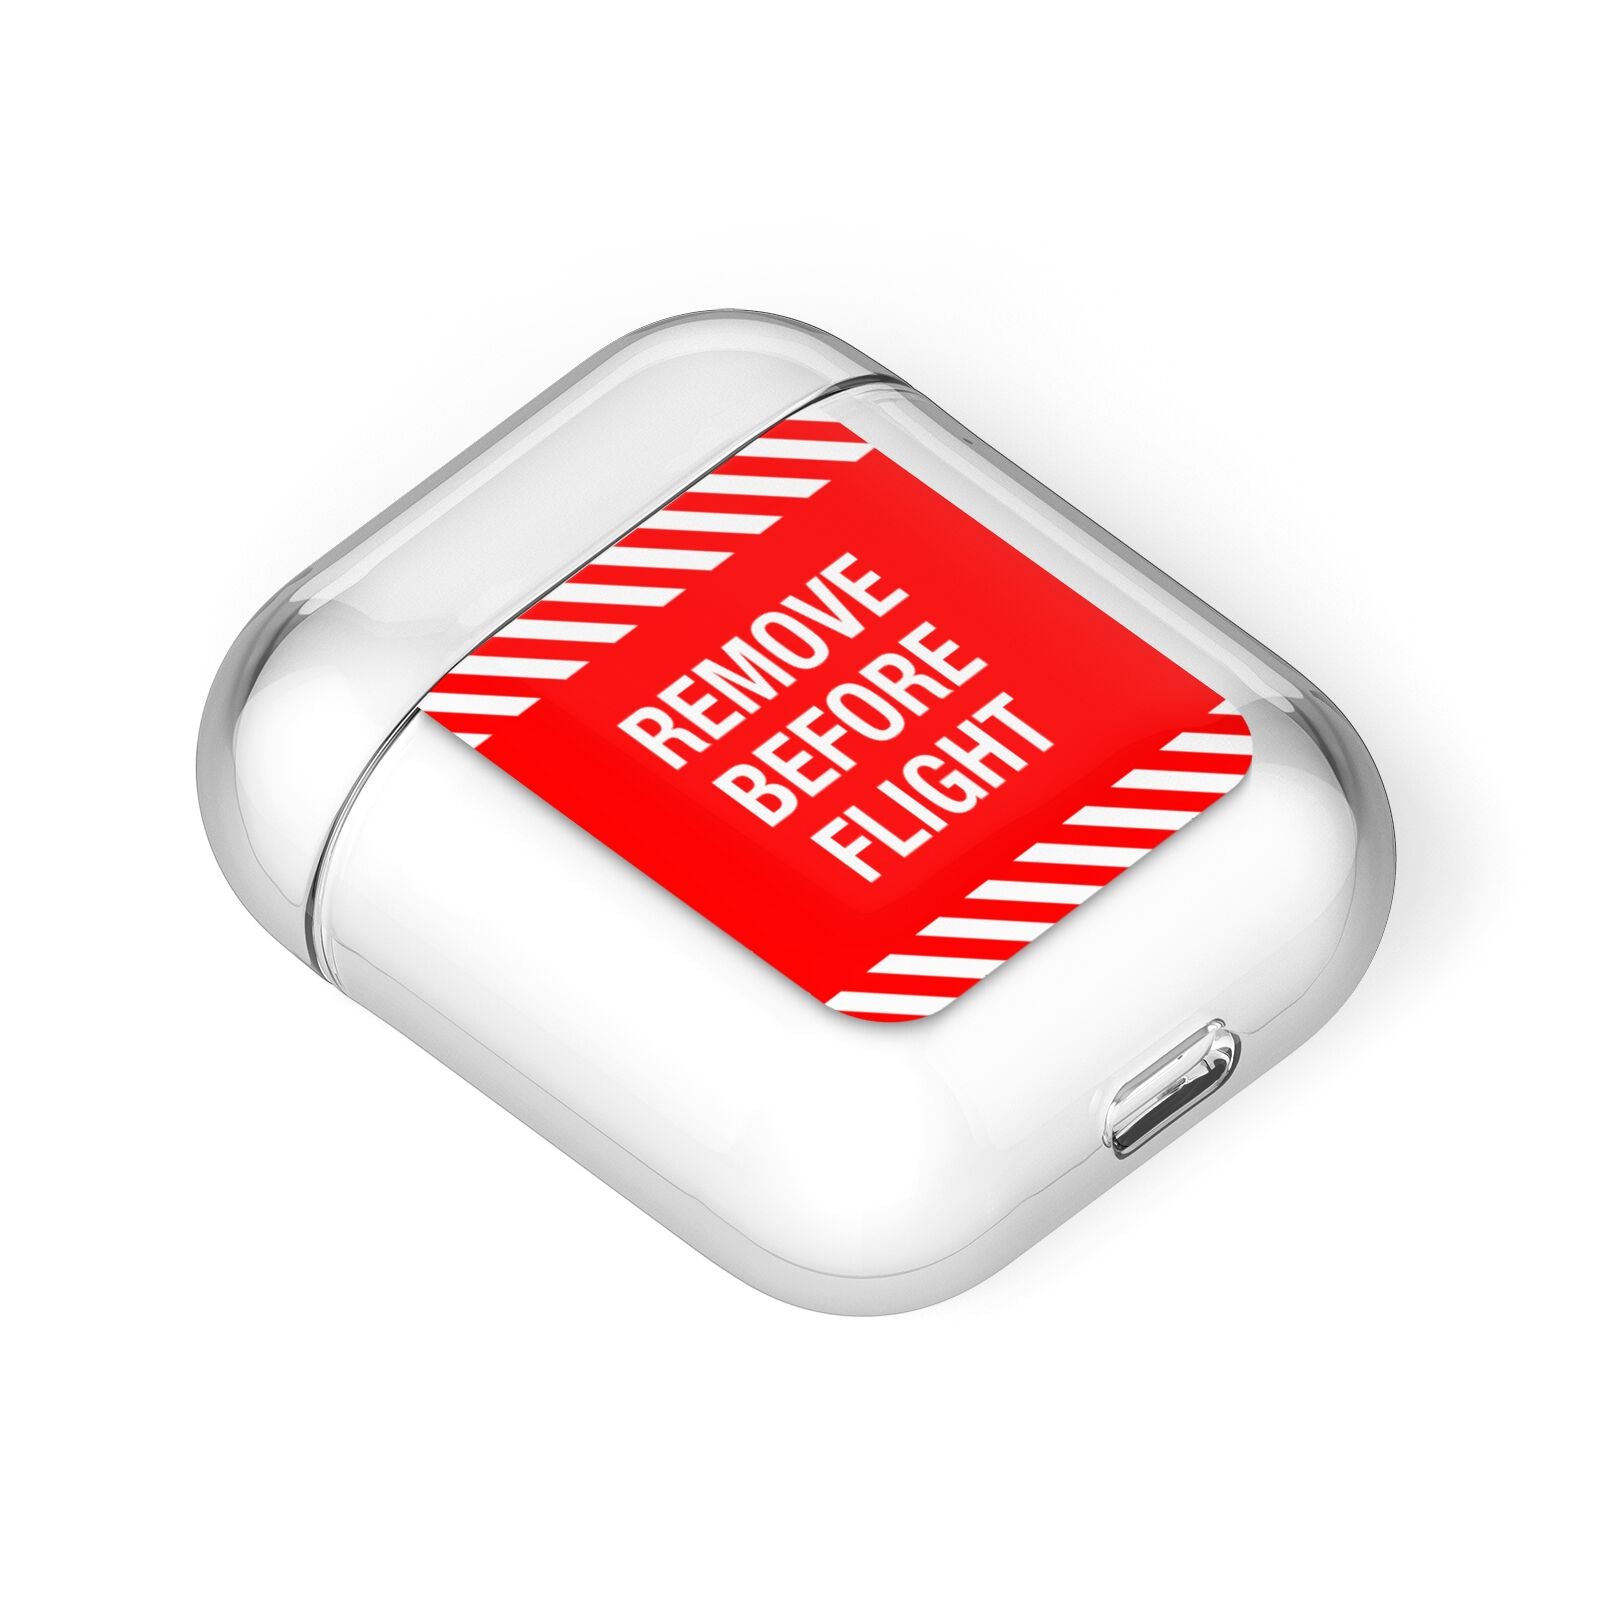 Remove Before Flight AirPods Case Laid Flat